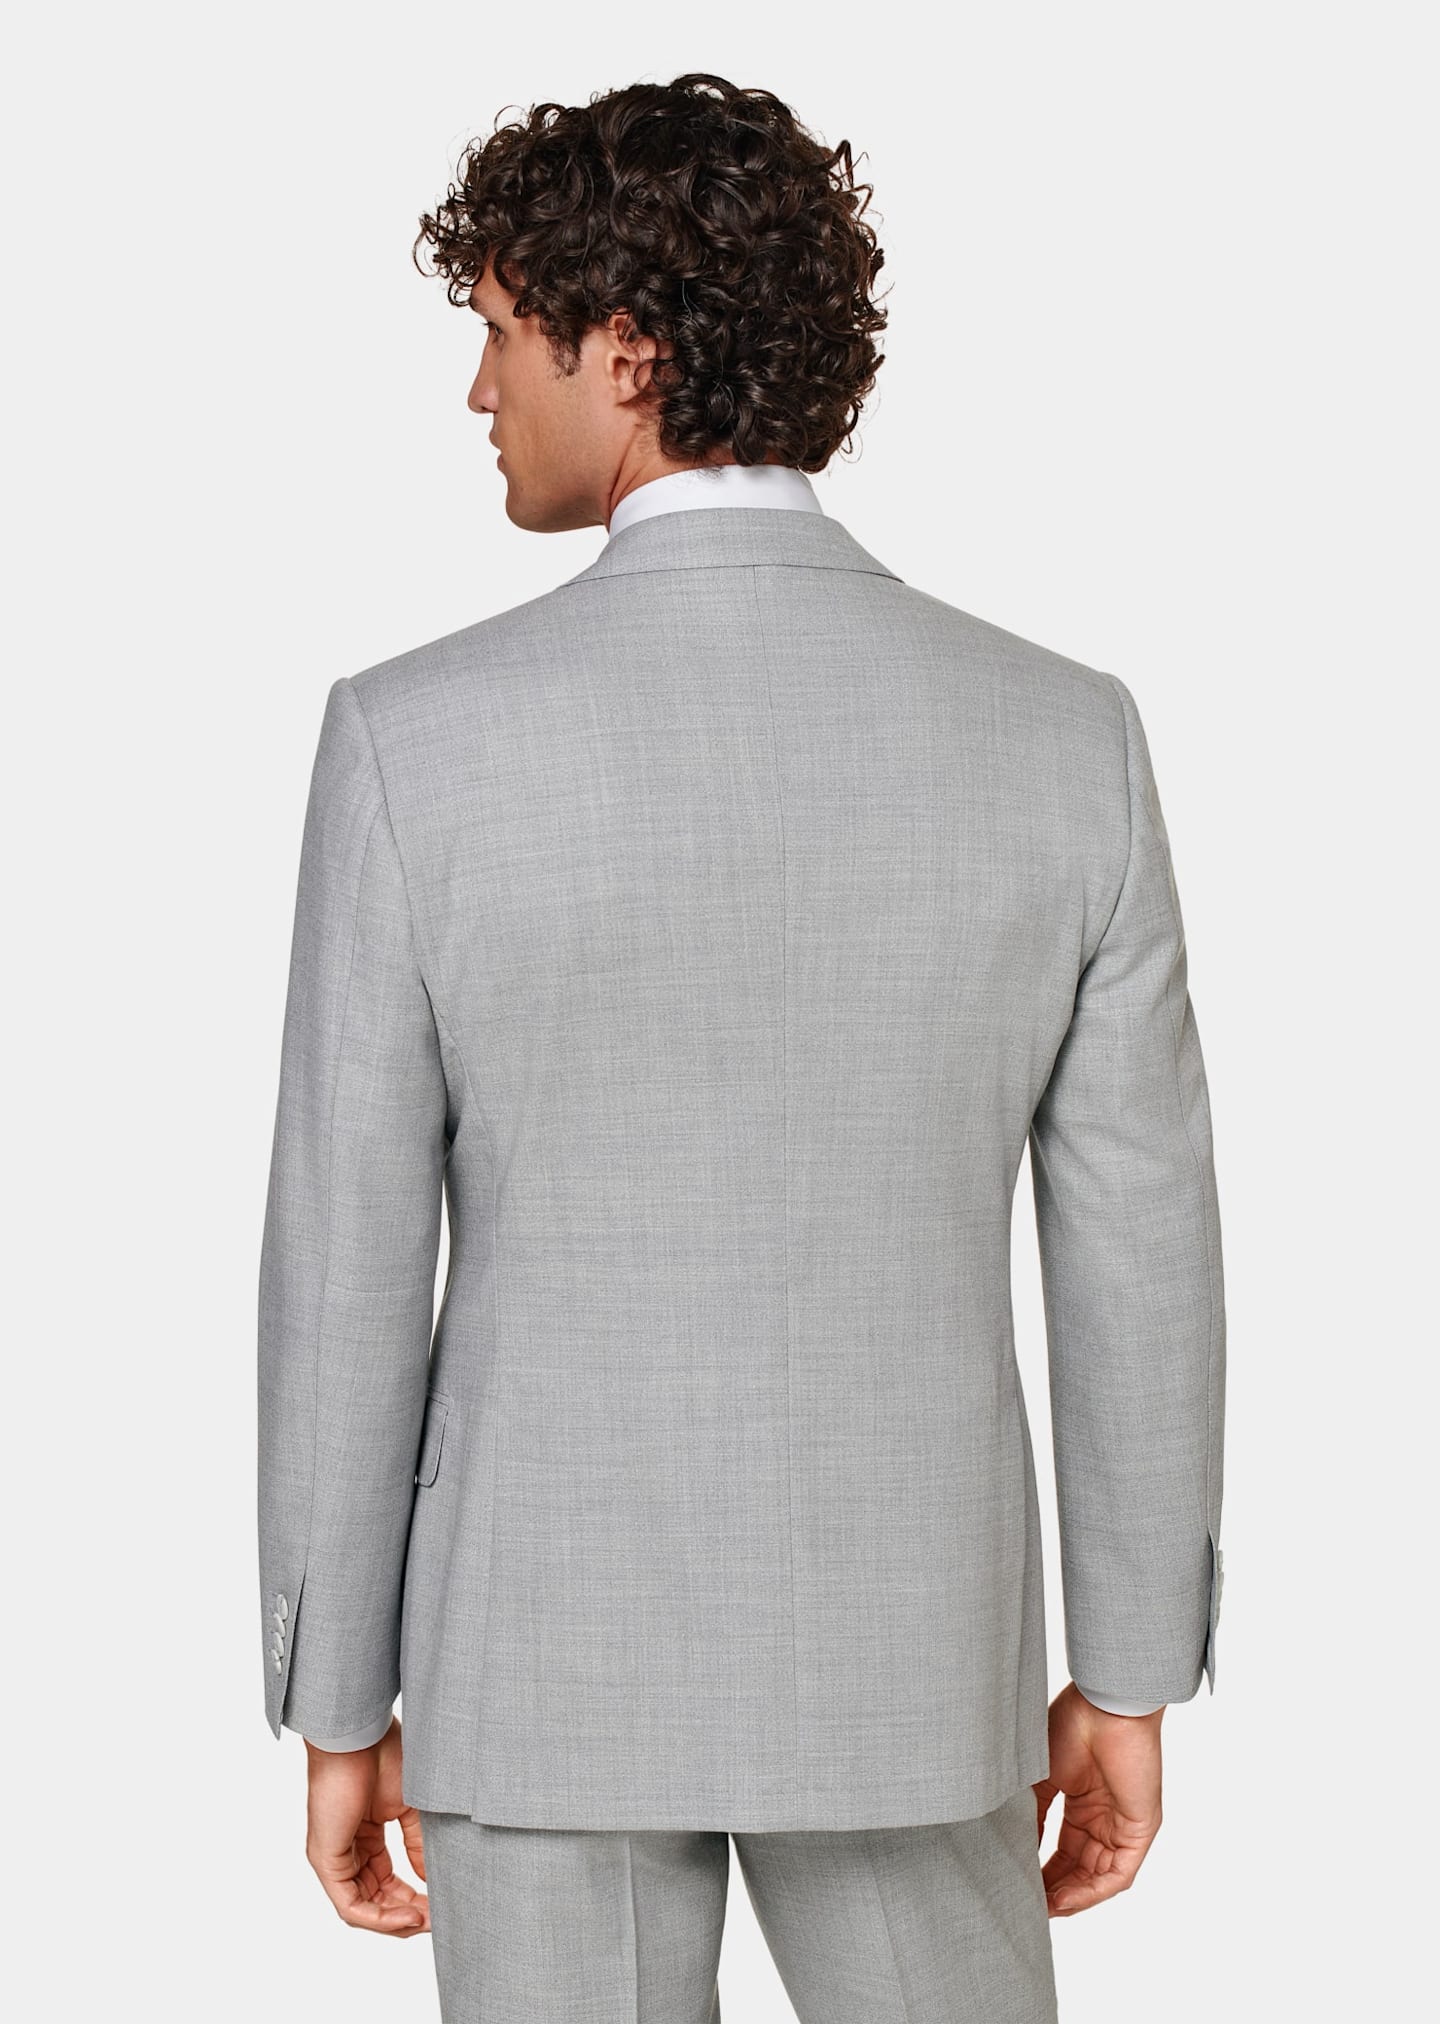 Rear view of grey regular fit suit